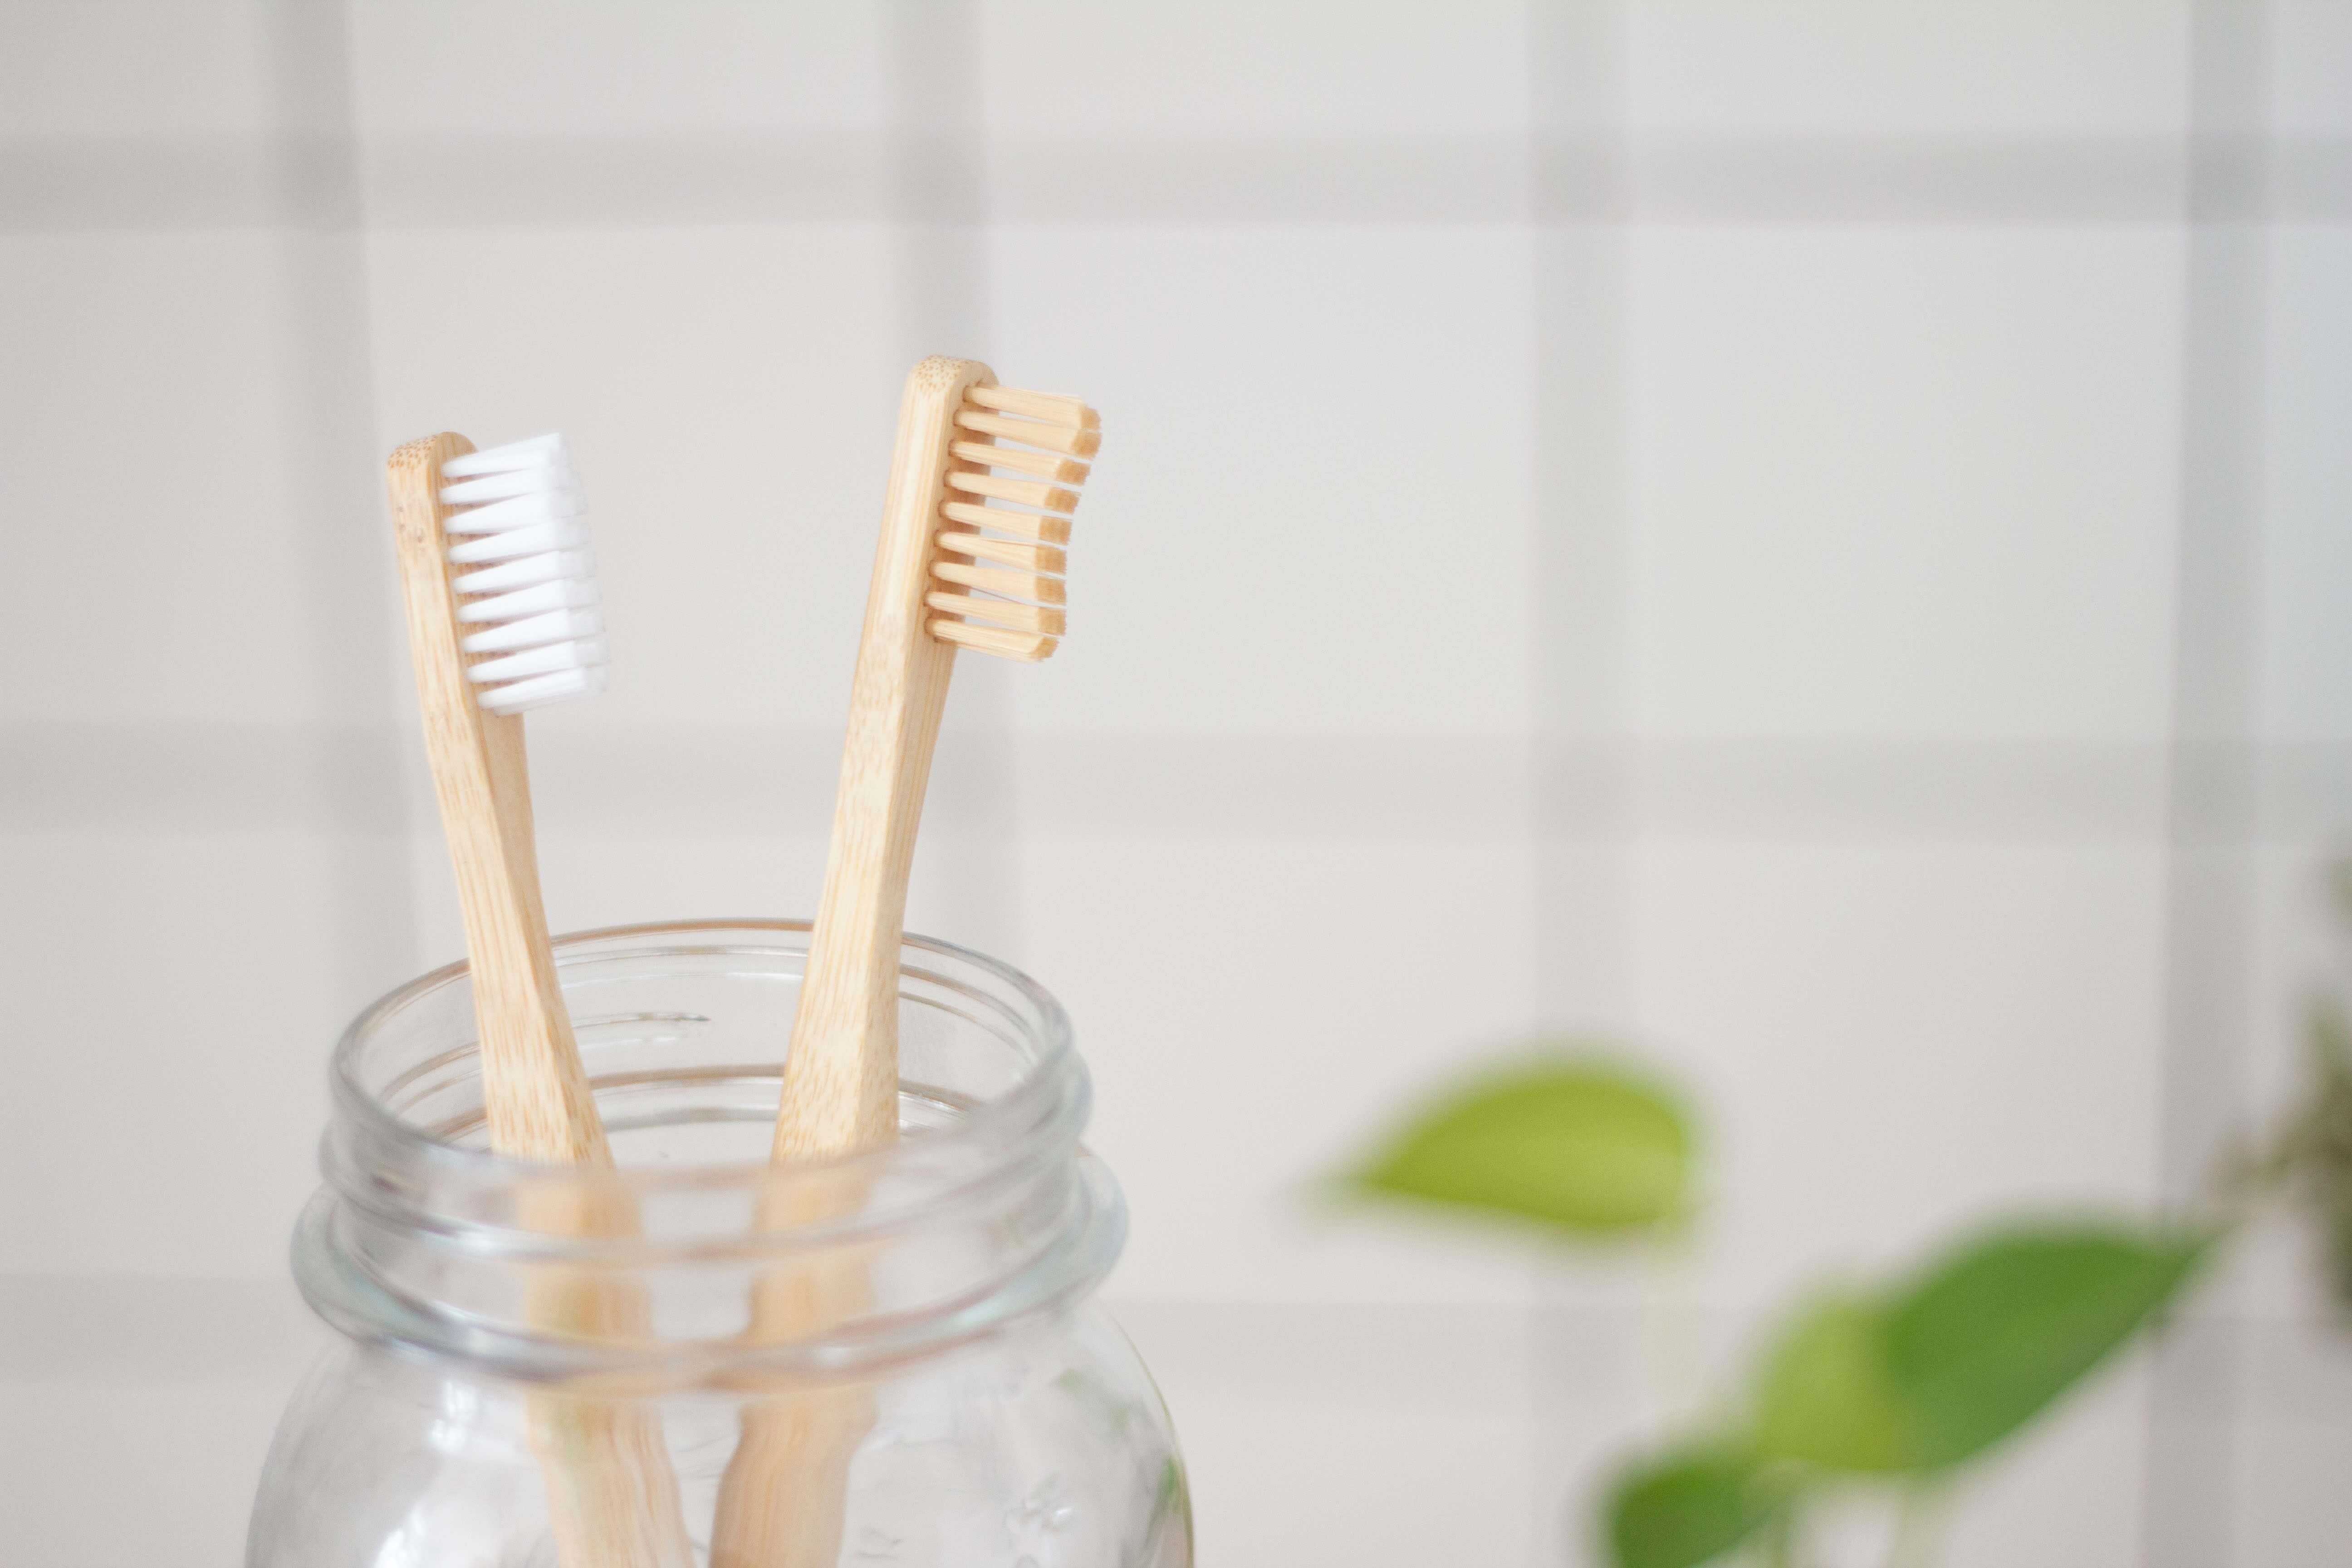 Two bamboo toothbrushes in a mason jar